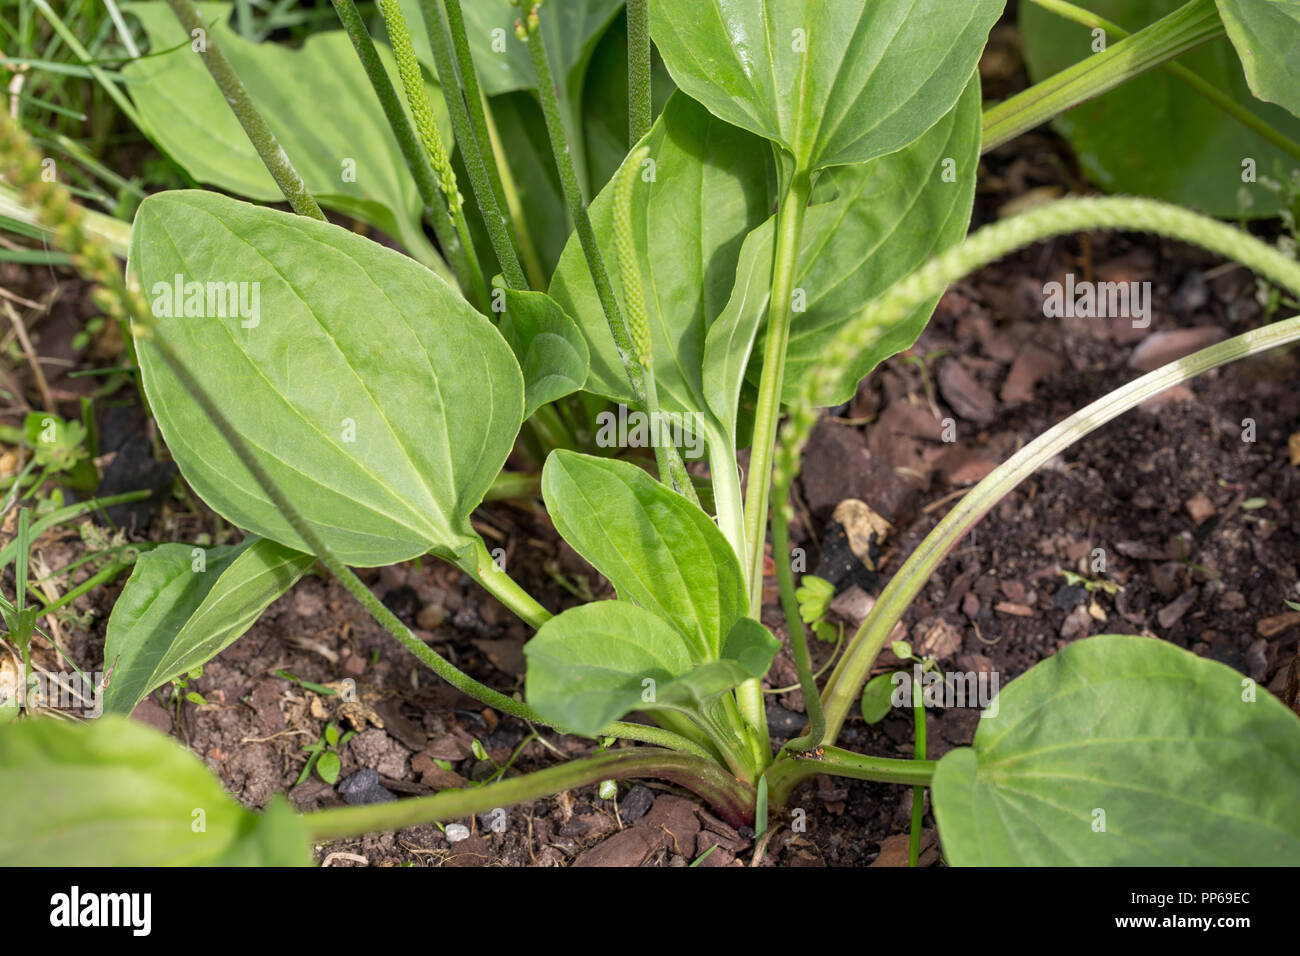 Plantain flowering plant with green leaf. Plantago major broadleaf plantain, white man's foot or greater plantain. Stock Photo